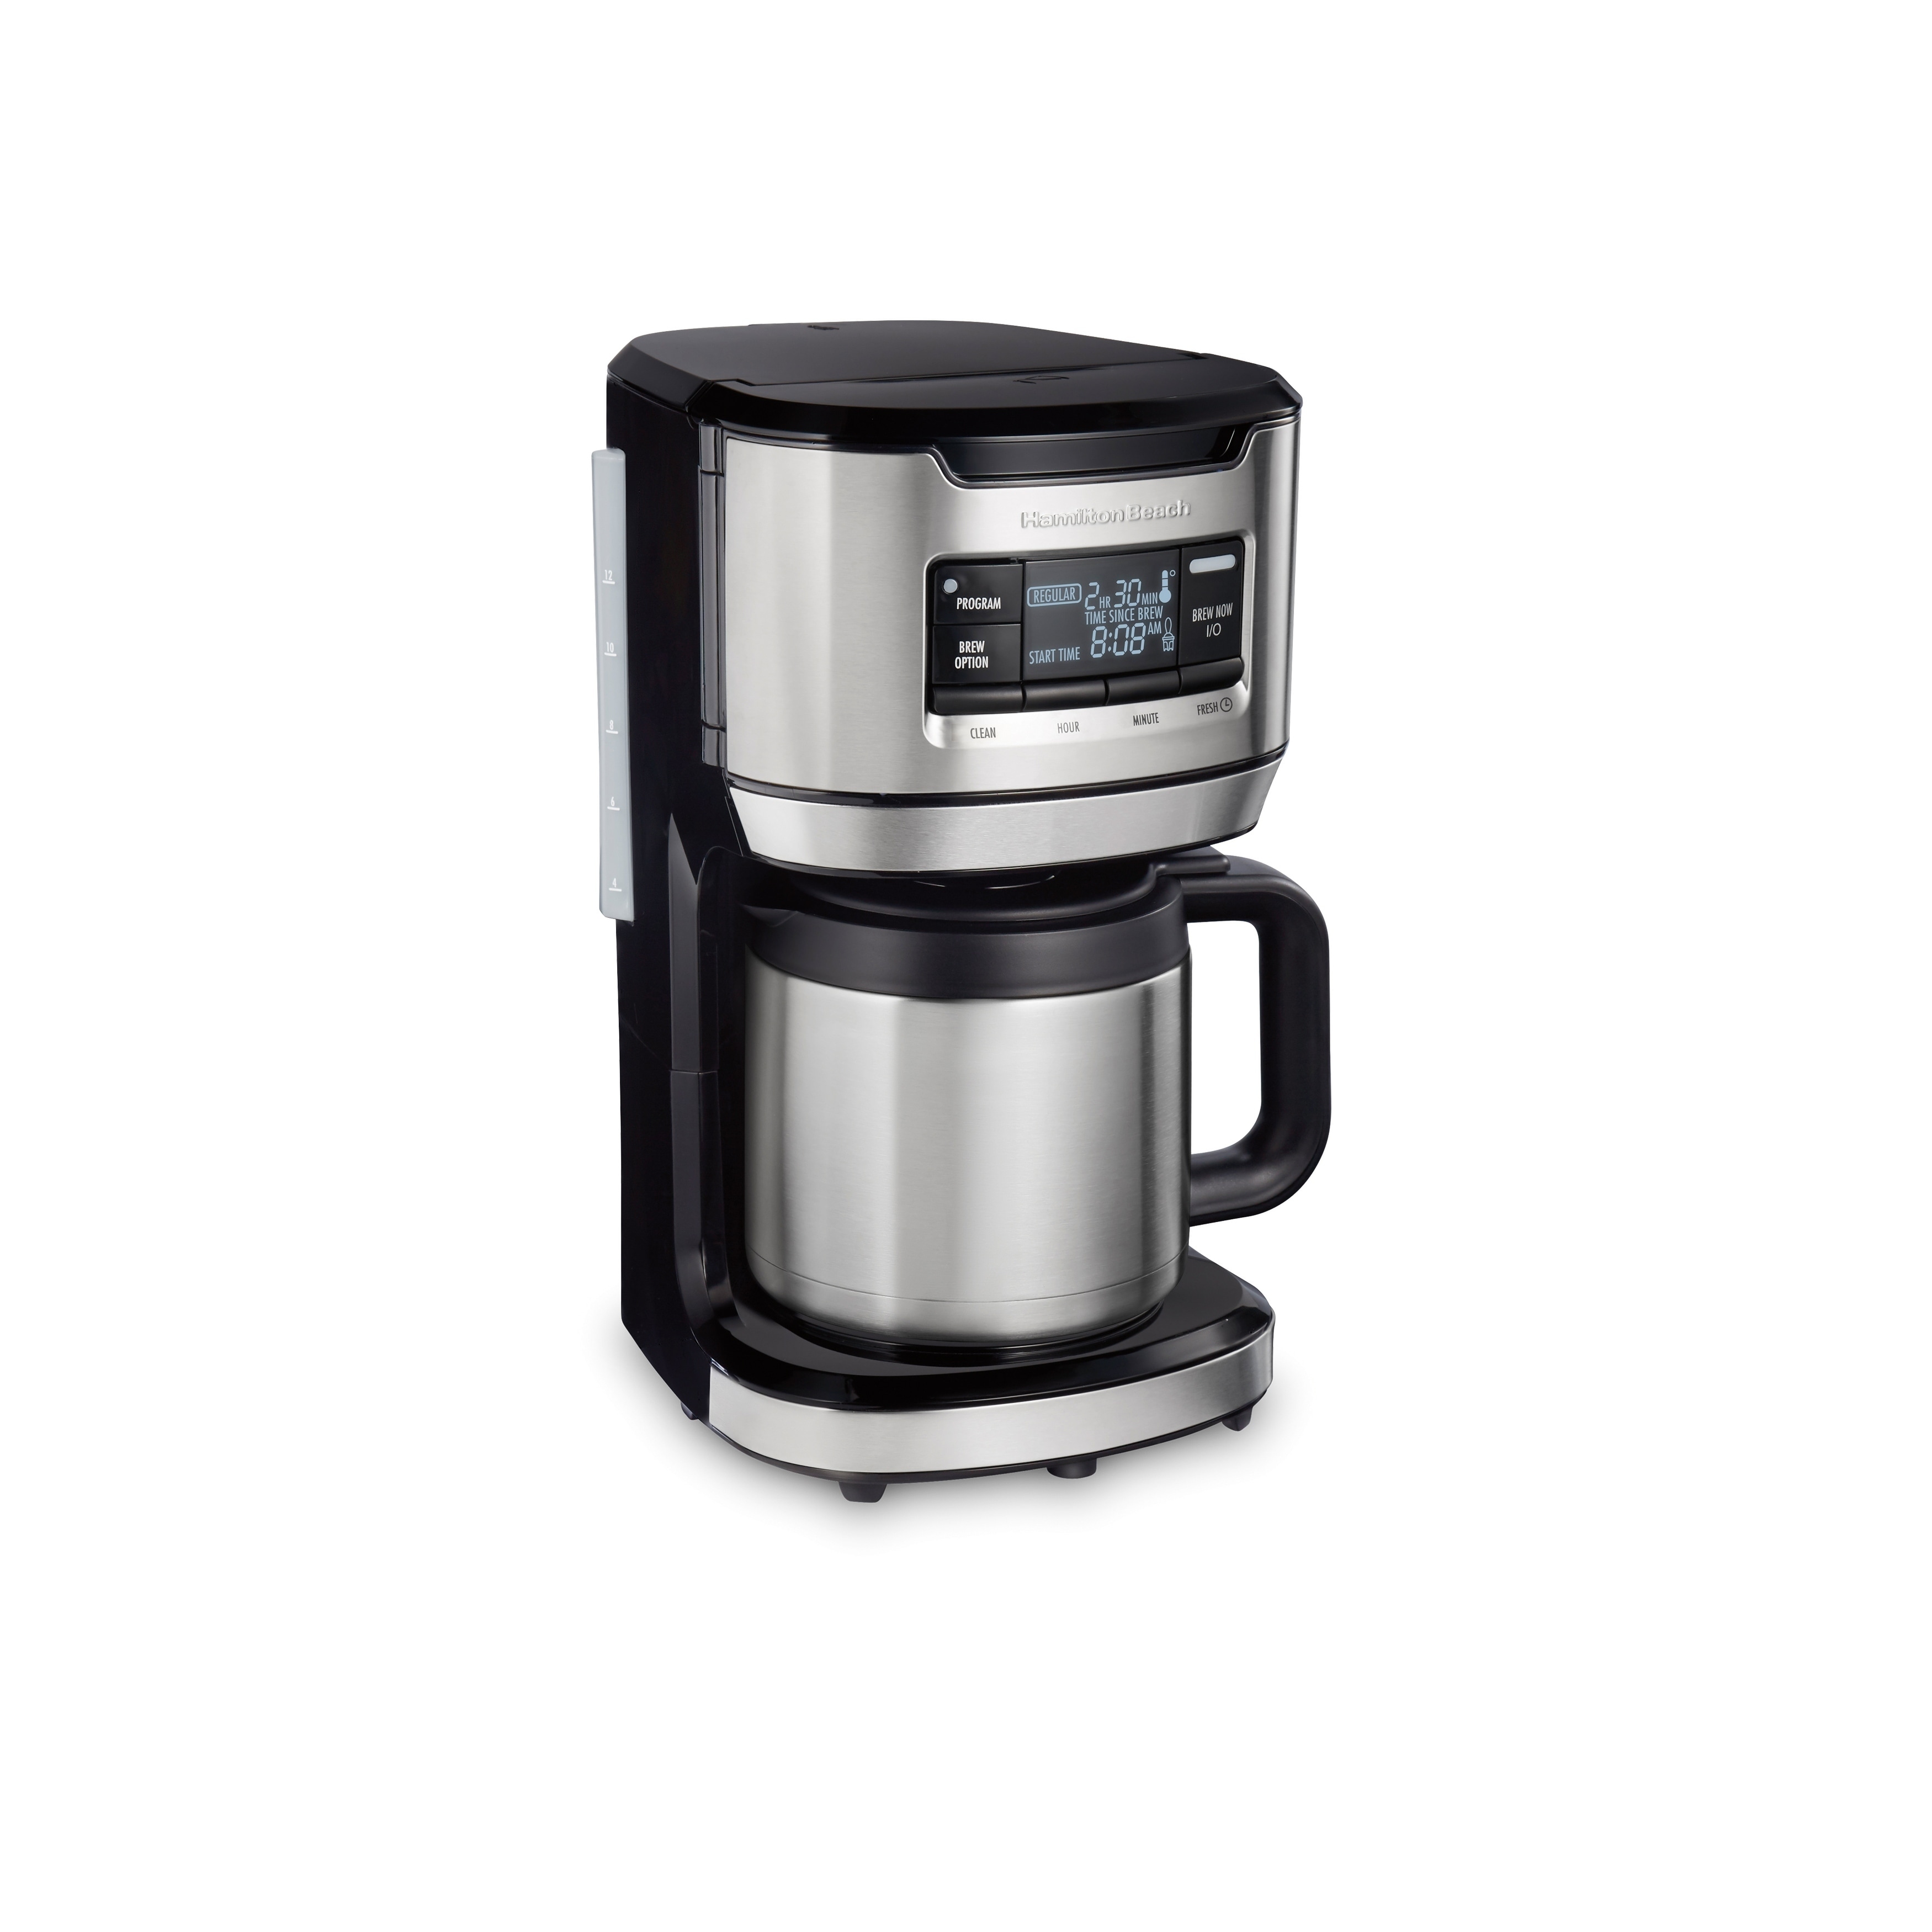 Hamilton Beach Black And Stainless Steel 2-Way Brewer 12-Cup